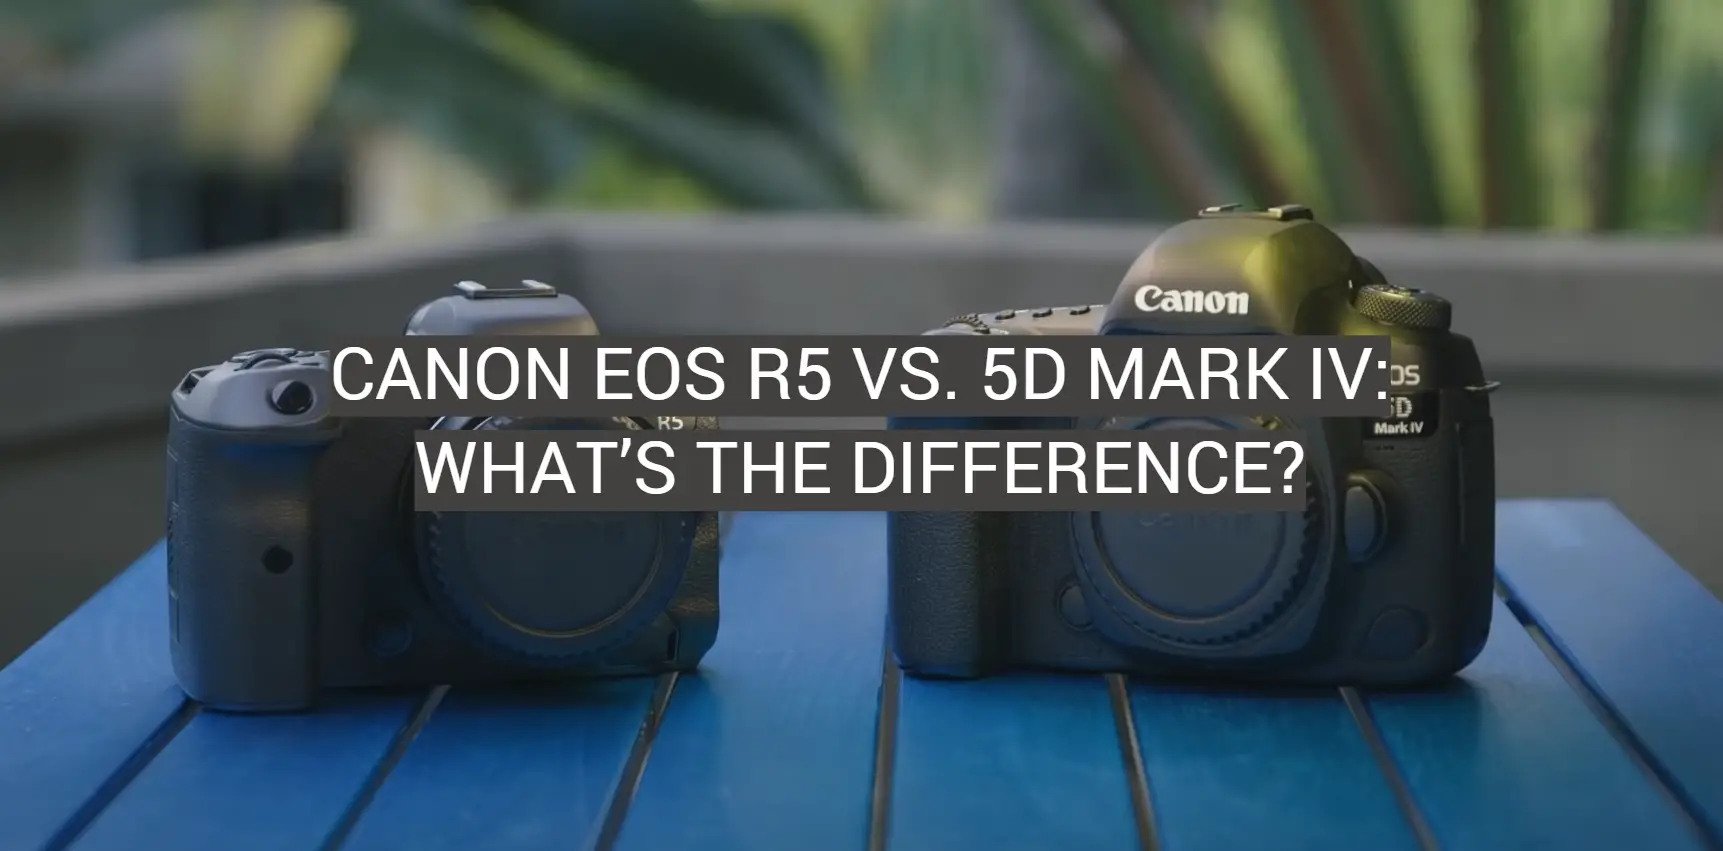 Canon EOS R5 vs. 5D Mark IV: What’s the Difference?